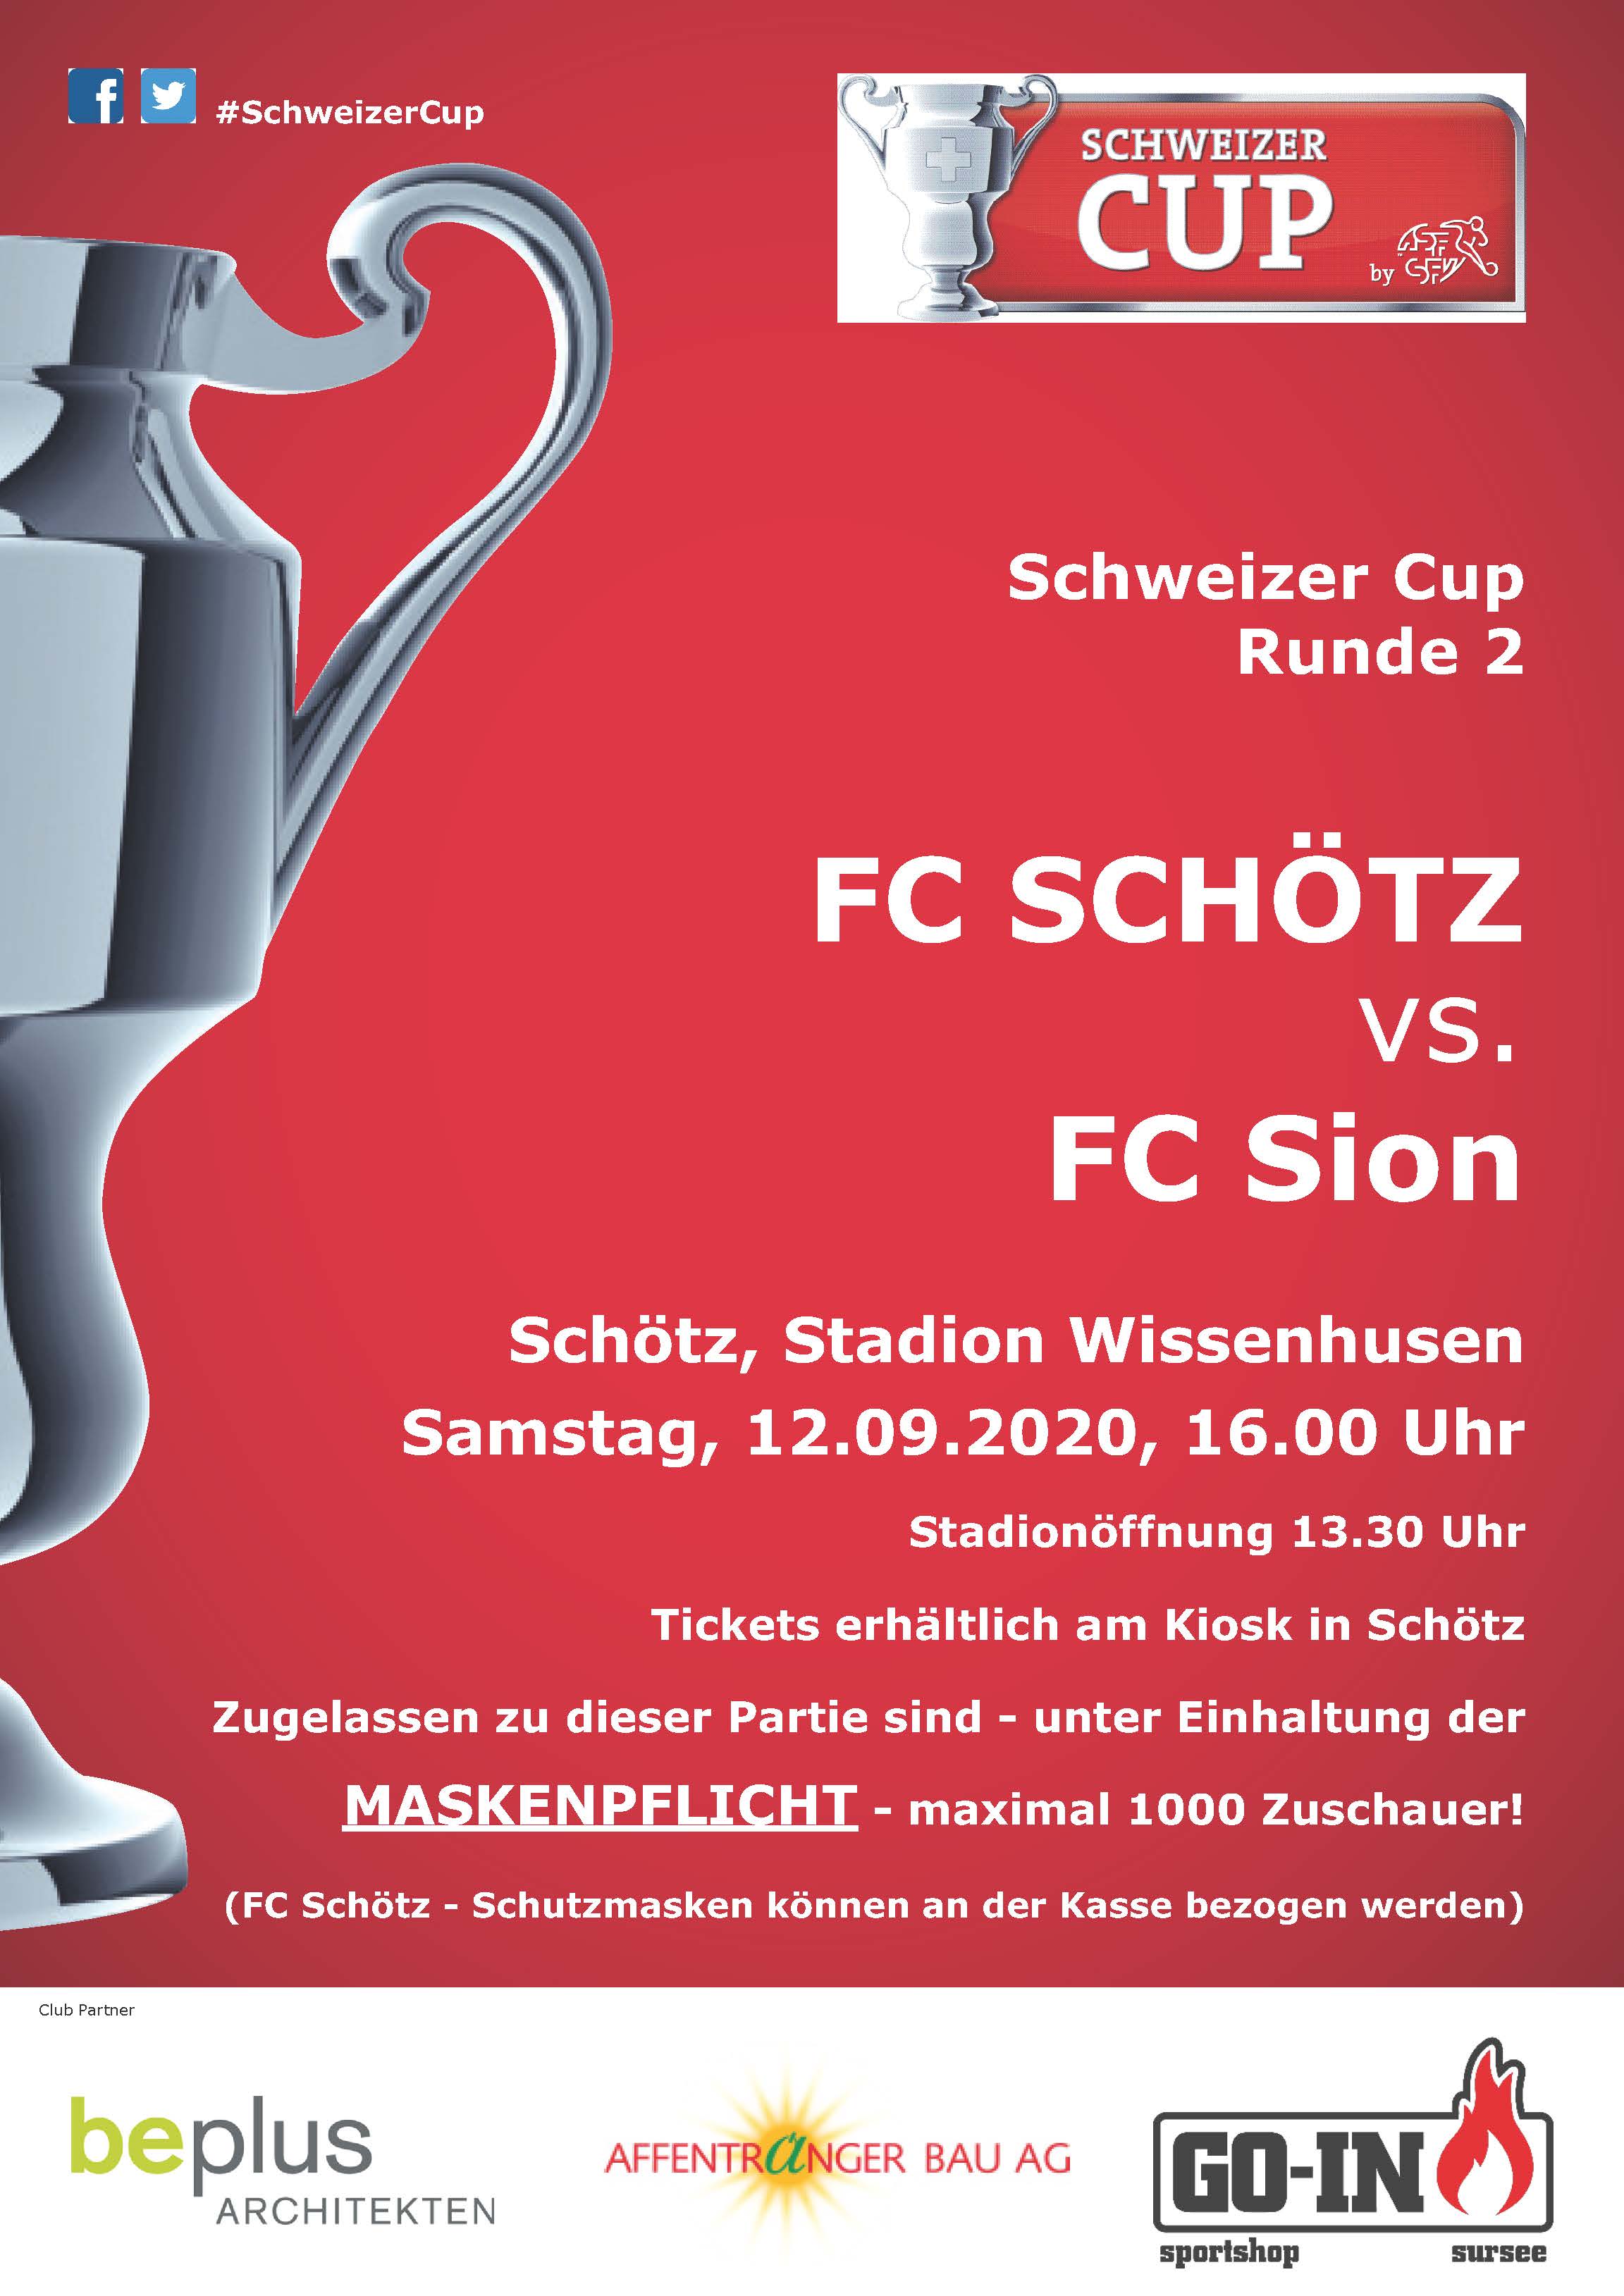 SC Matchposter A3 07 2020 FCS Sion 003